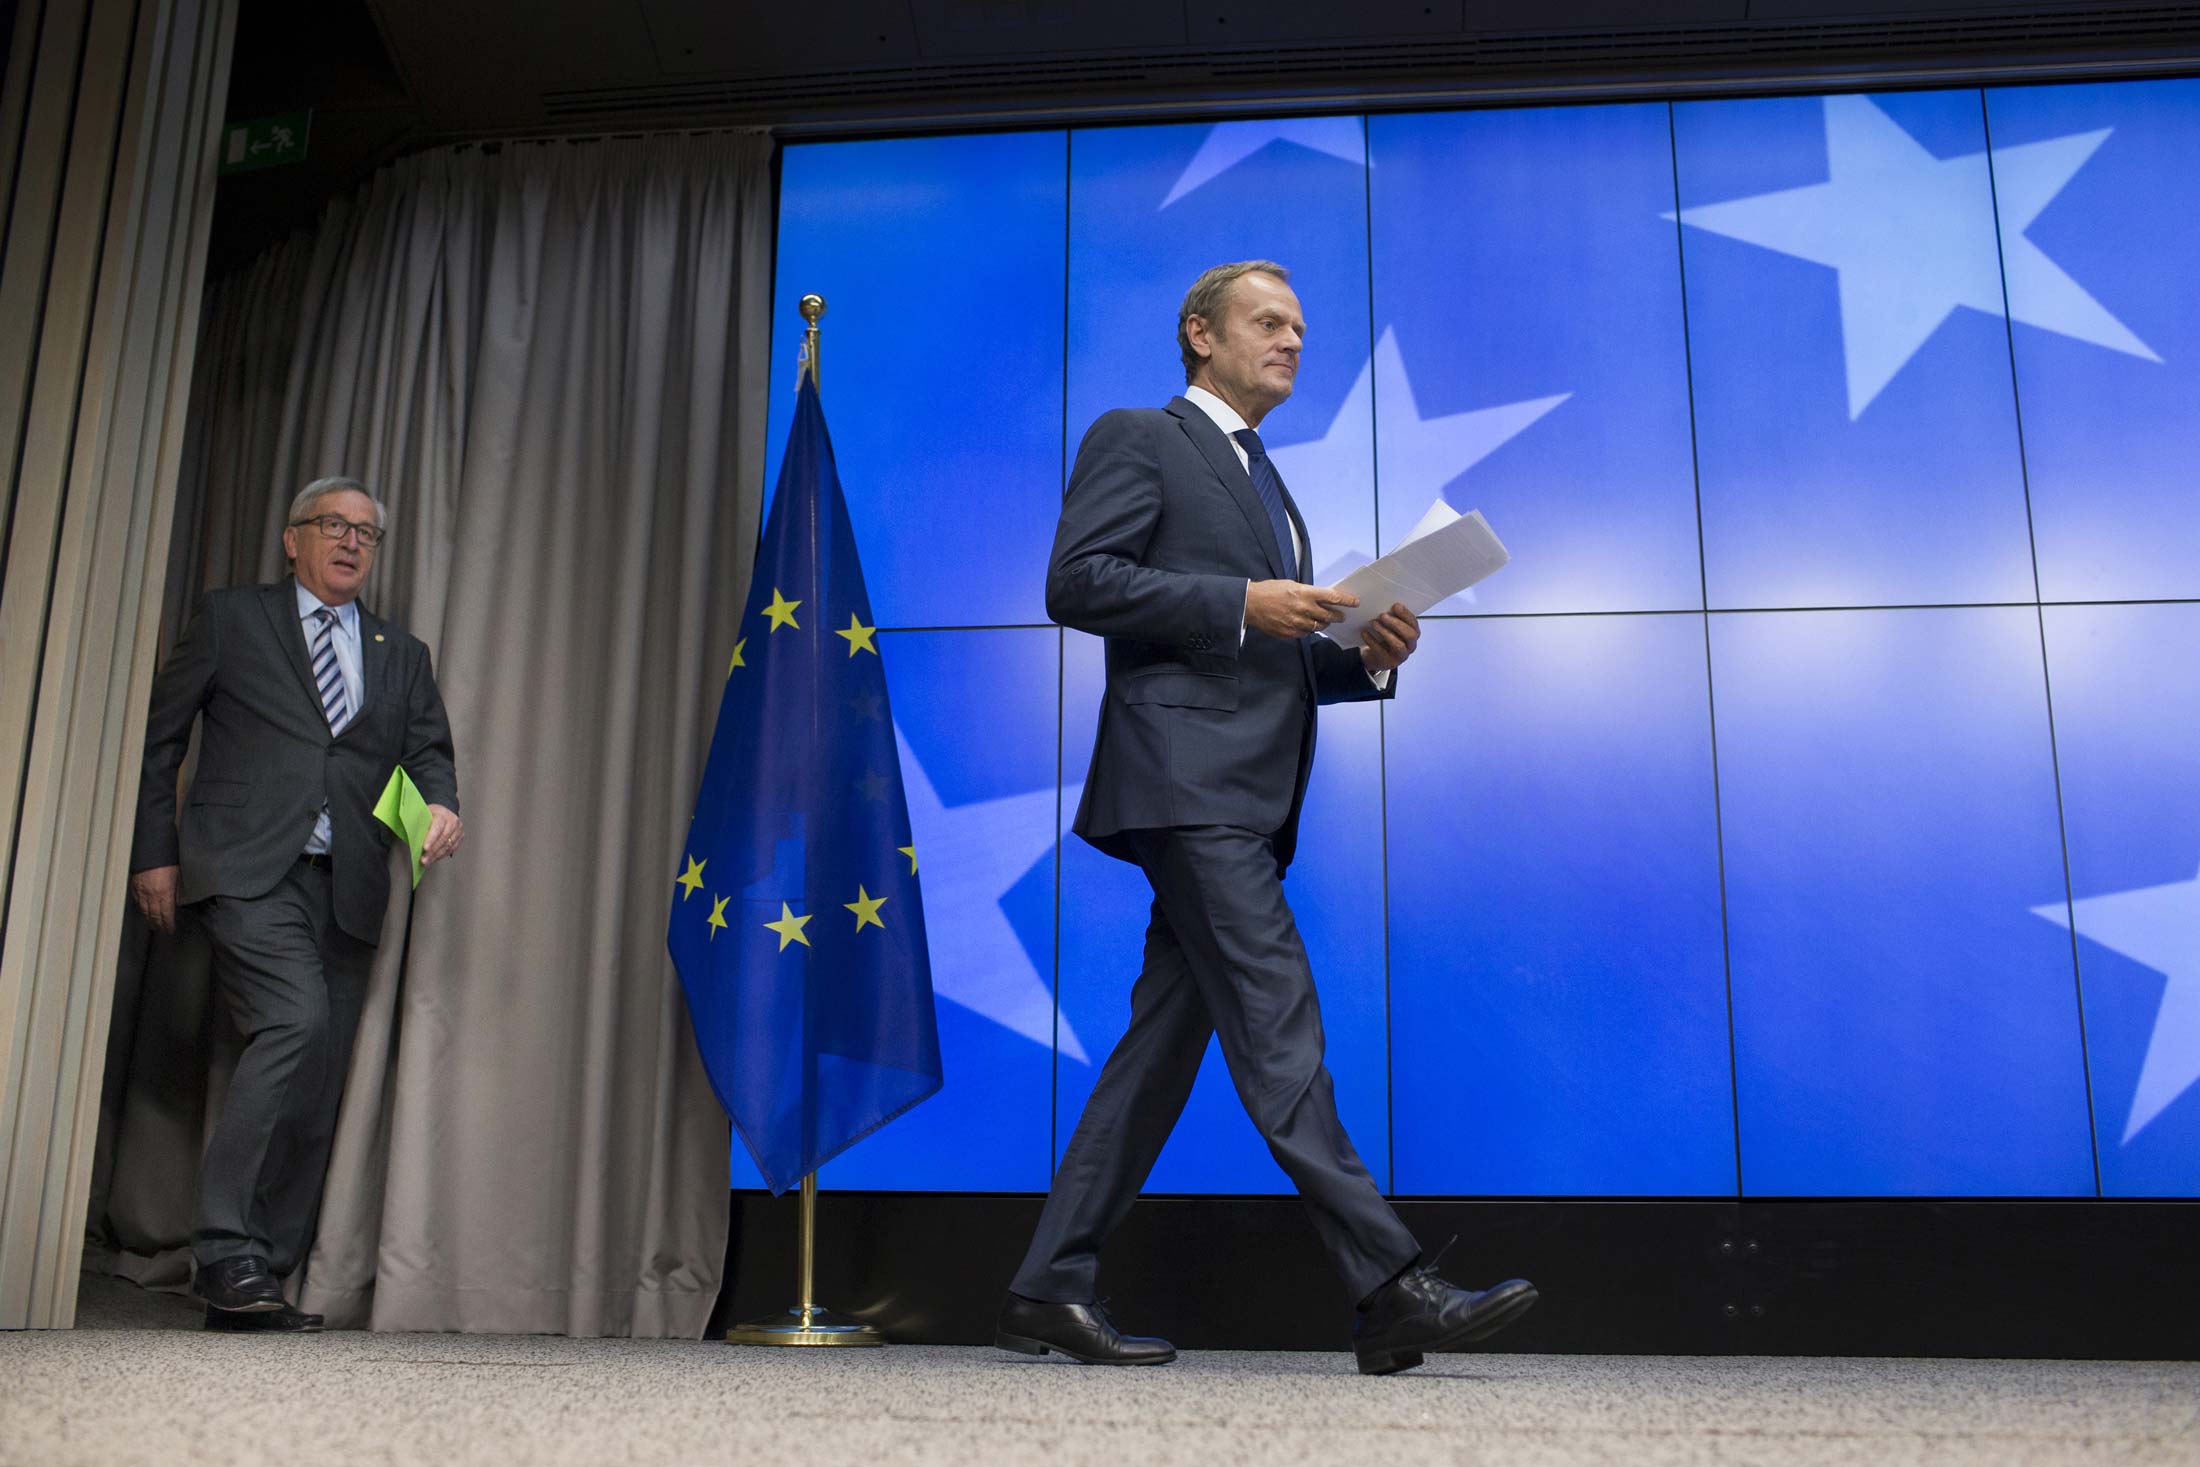 Jean-Claude Juncker, president of the European Commission, left, and Donald Tusk, president of the European Council, arrive for a news conference during a meeting of EU leaders in Brussels on June 29.
